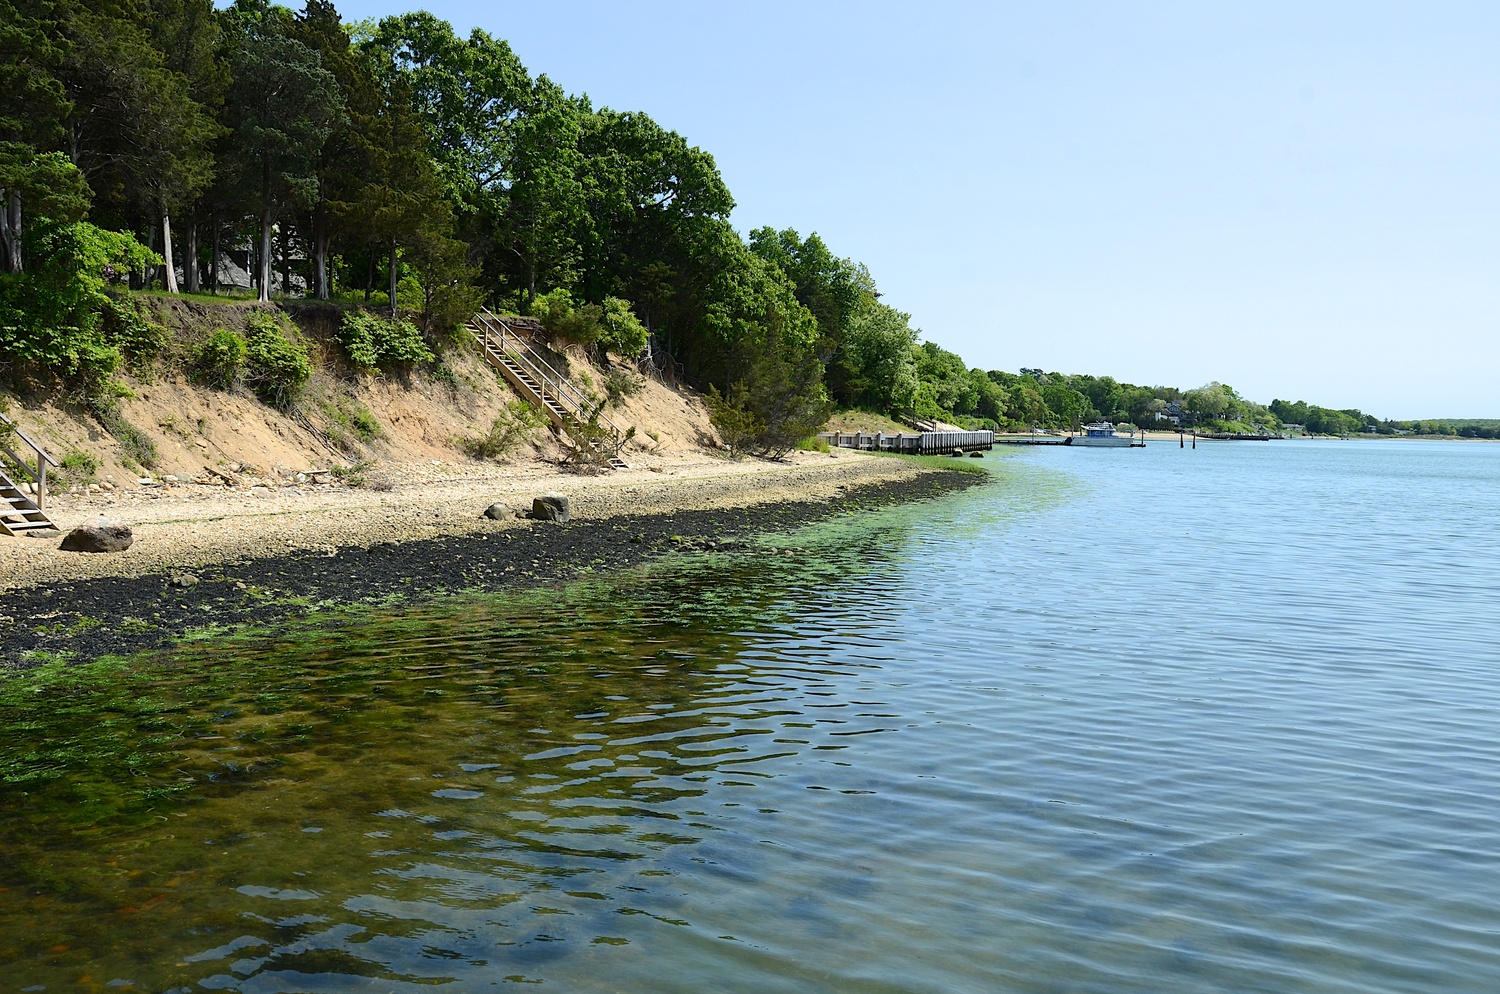 The owners of a home along Three Mile Harbor's eastern shoreline were told by the town zoning board that they could not put in a dock. A court overruled the decision. 
KYRIL BROMLEY